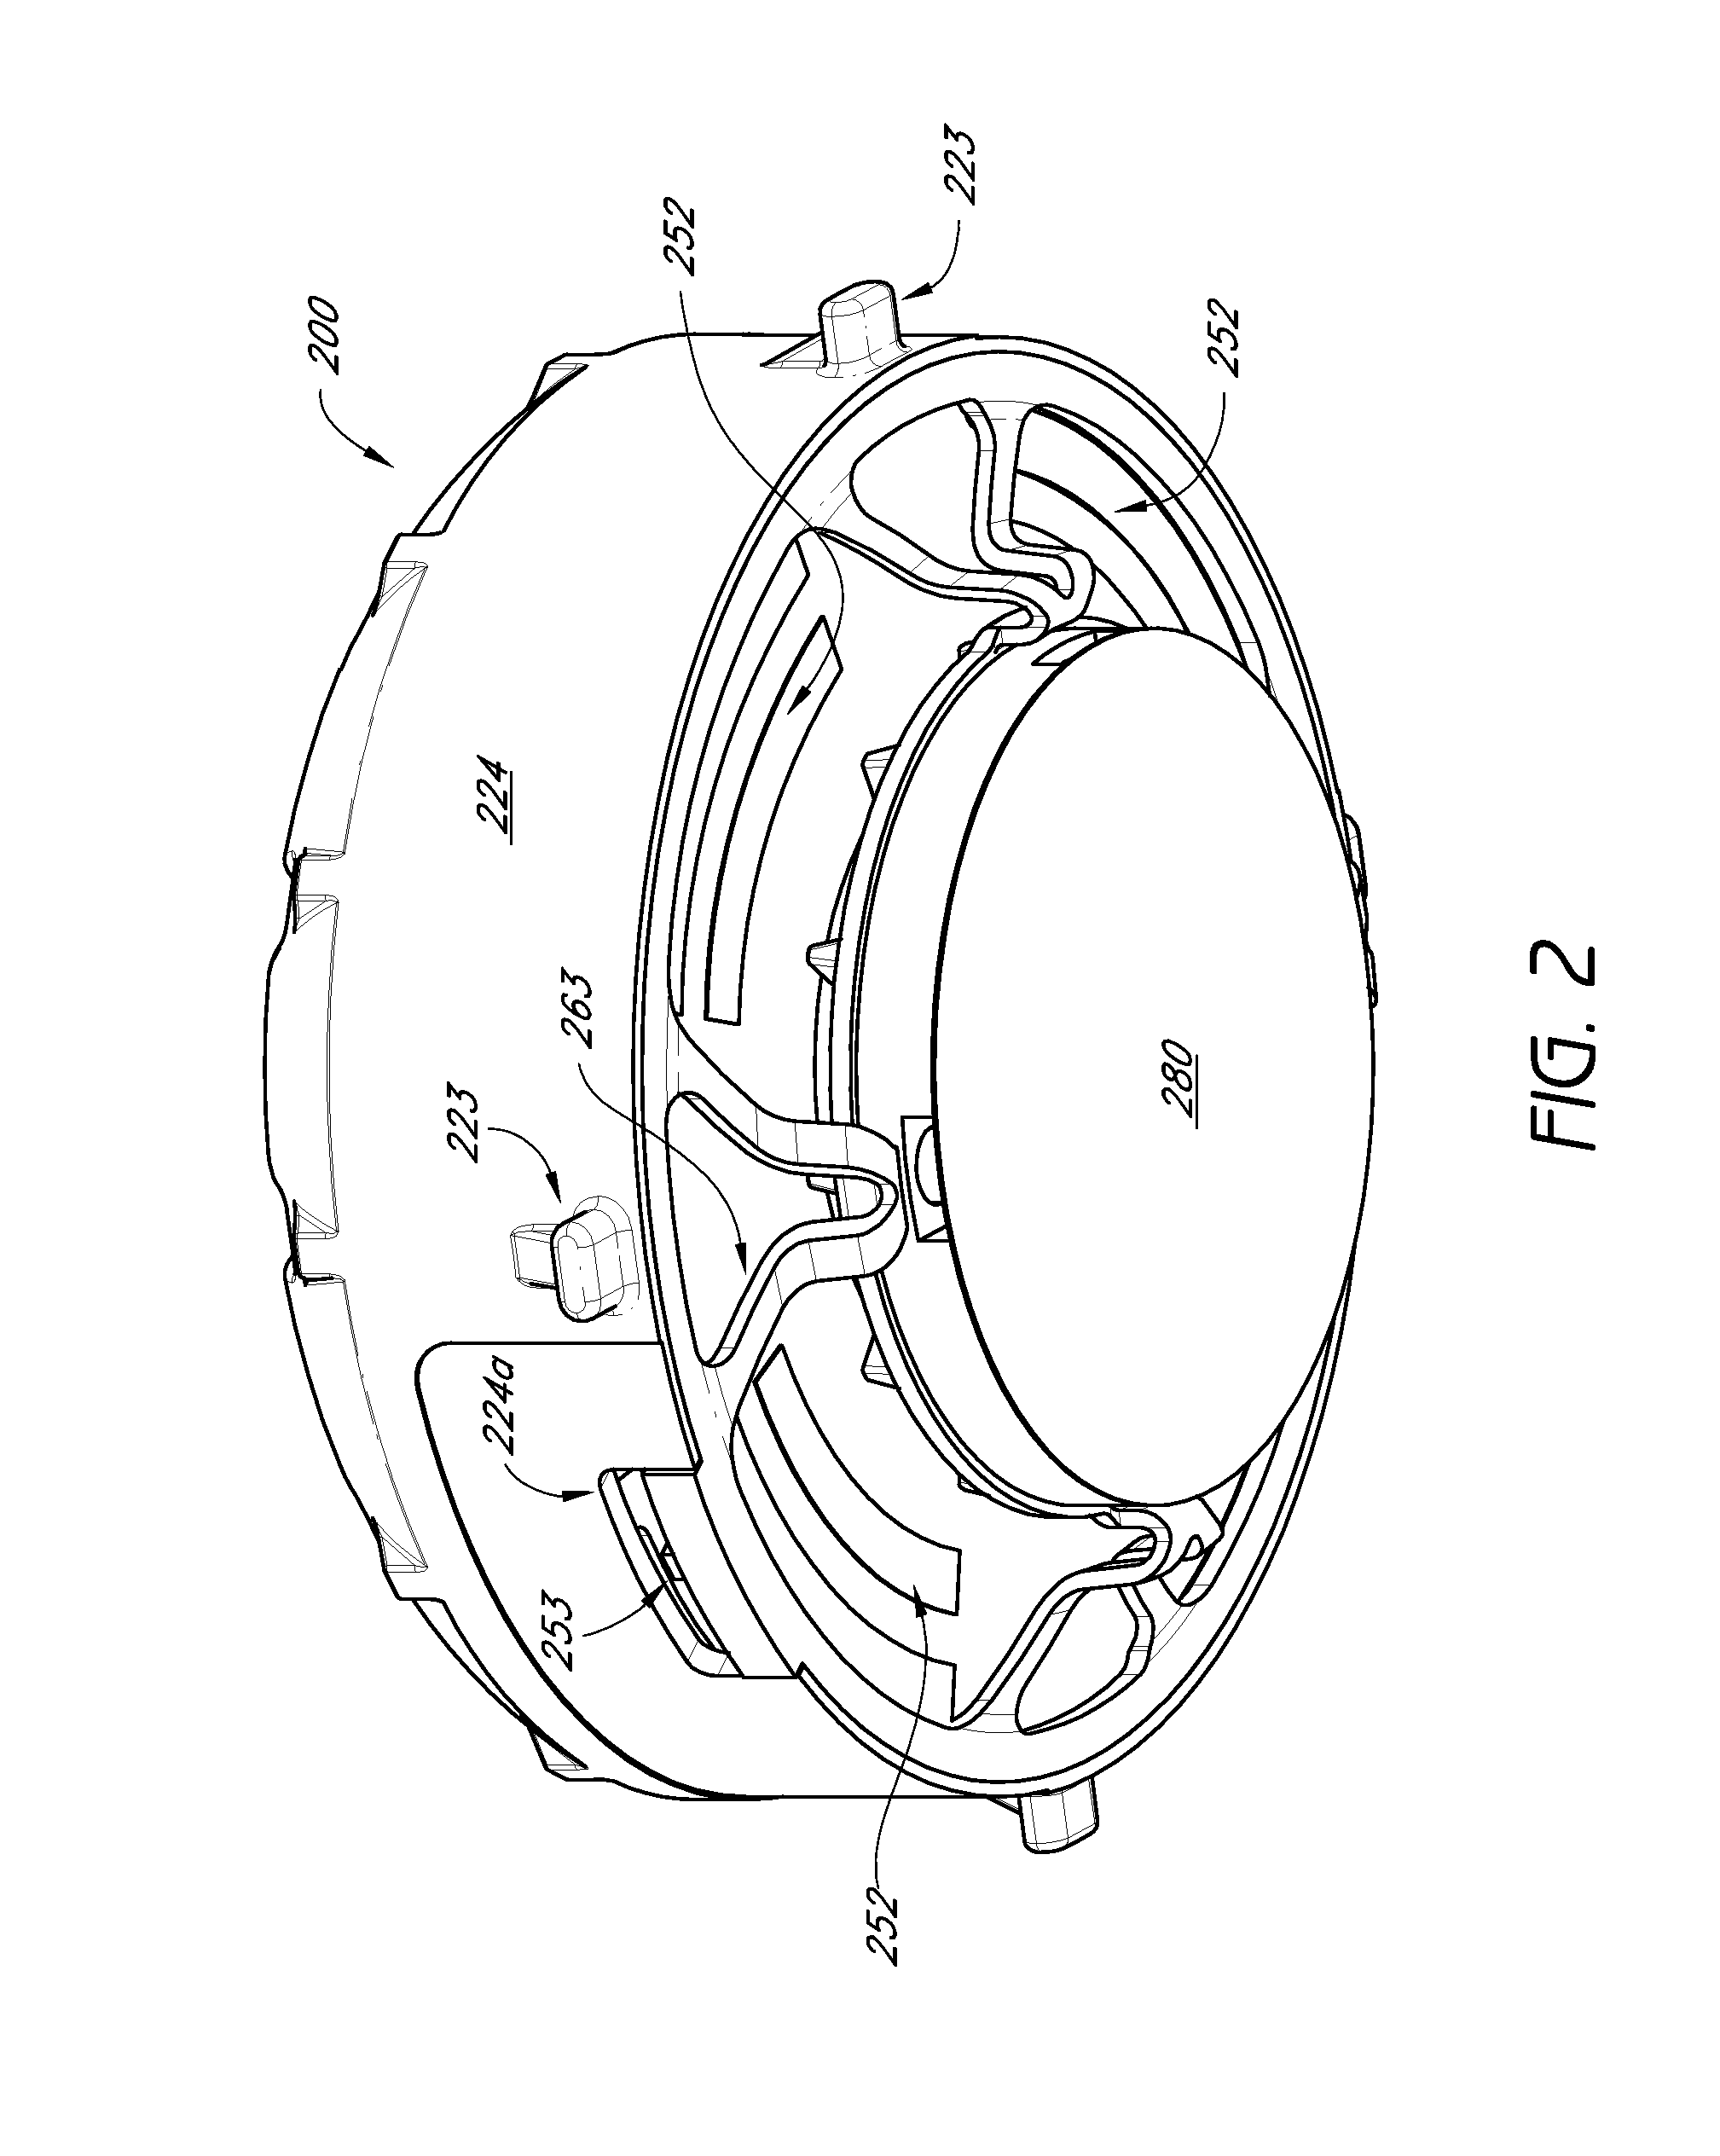 Removable LED light module for use in a light fixture assembly